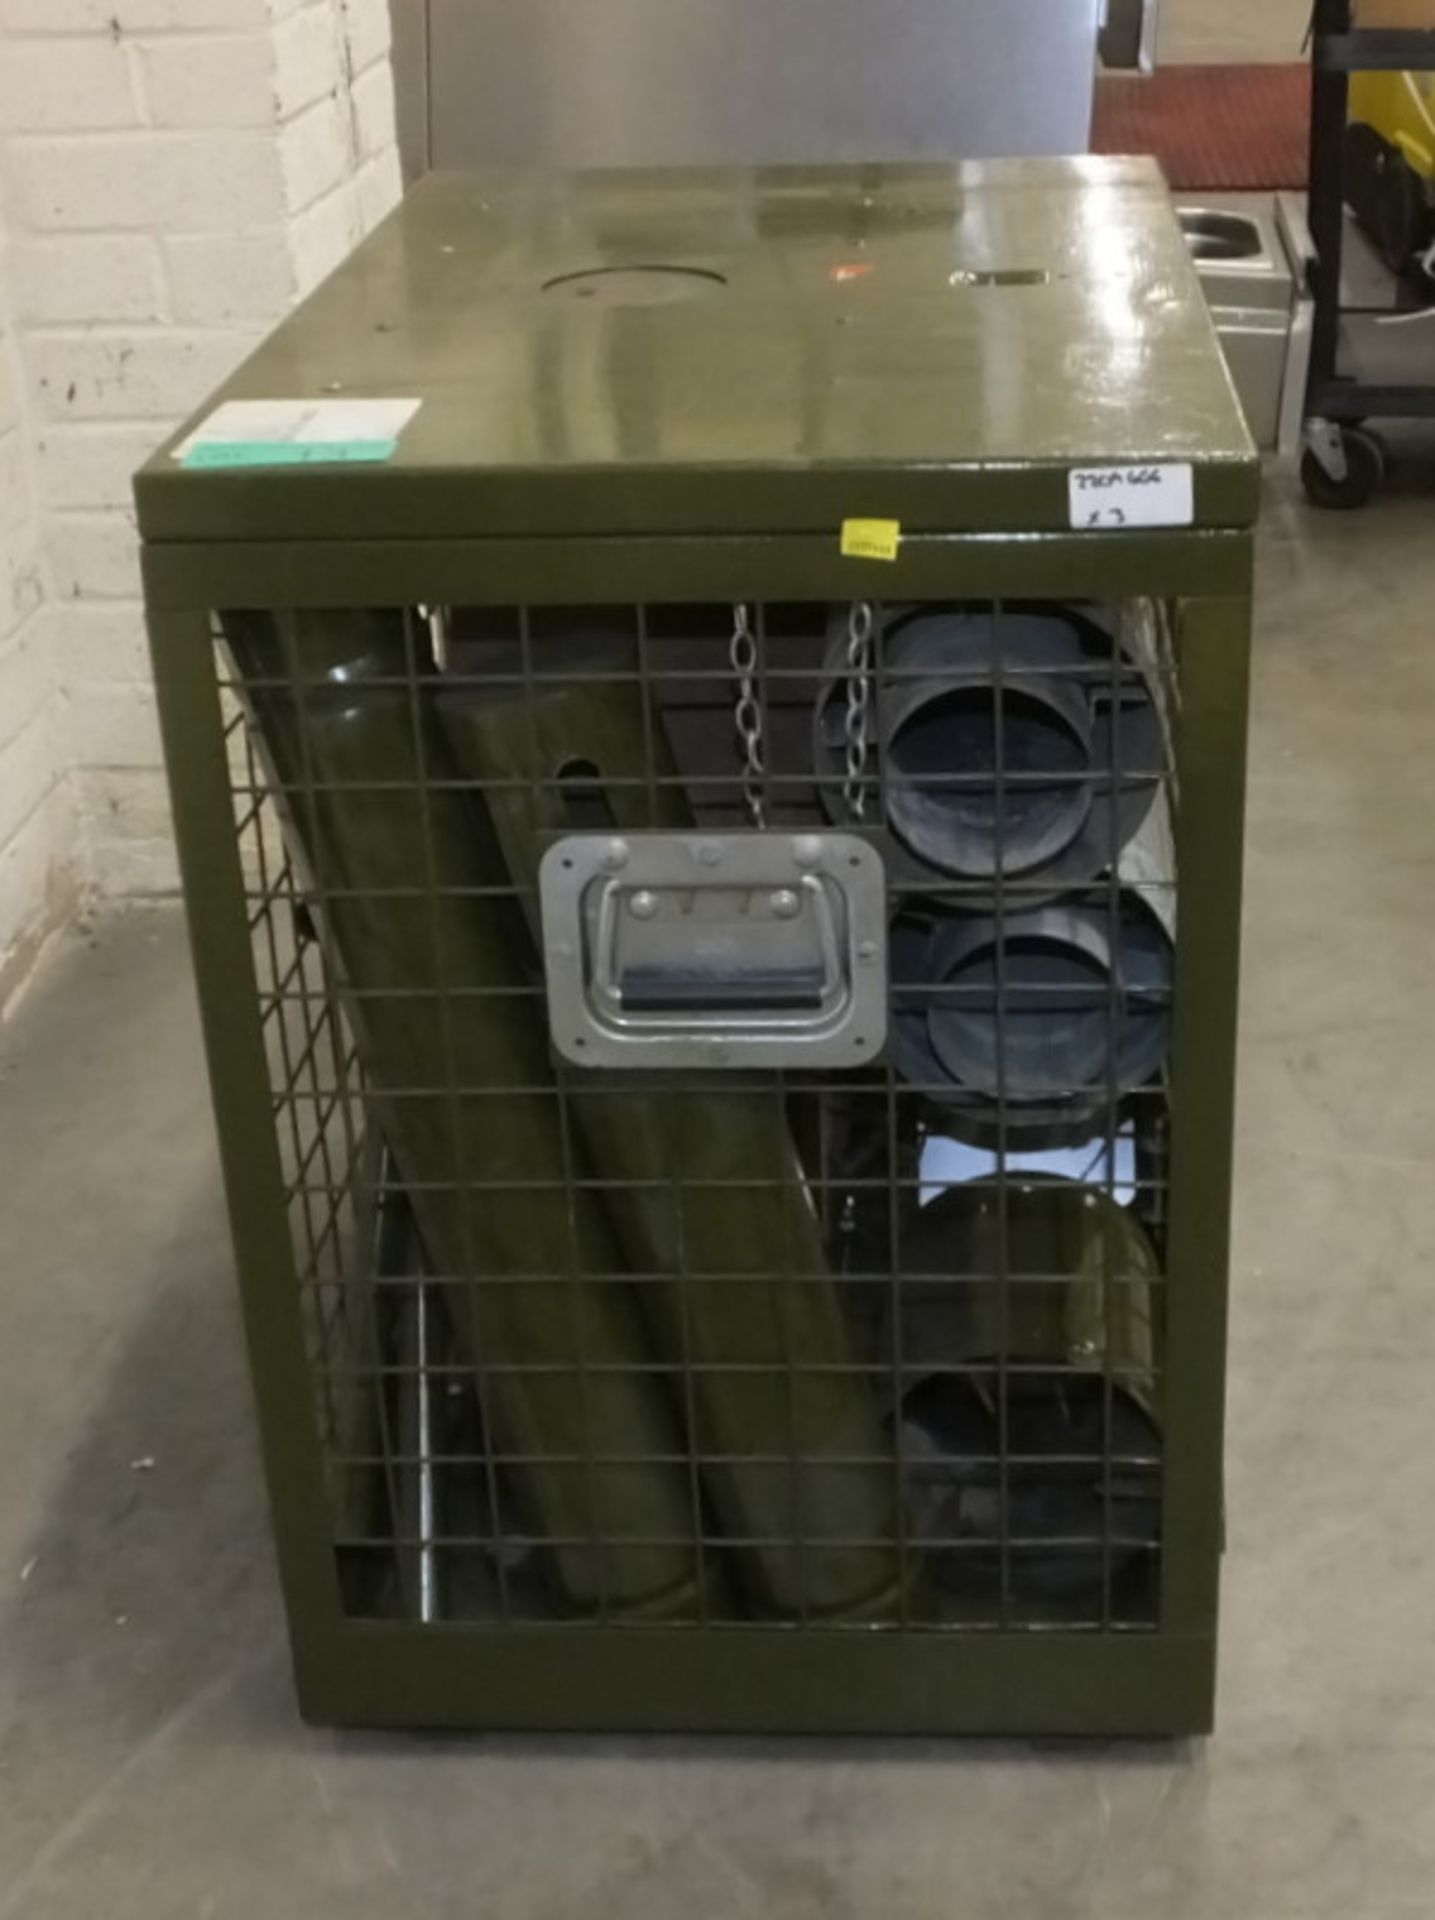 HotBox Heaters Tent Heater GHS III - NSN 4520-99-130-6045 Output - 5-15kW, Ex-MOD specific - Image 10 of 10